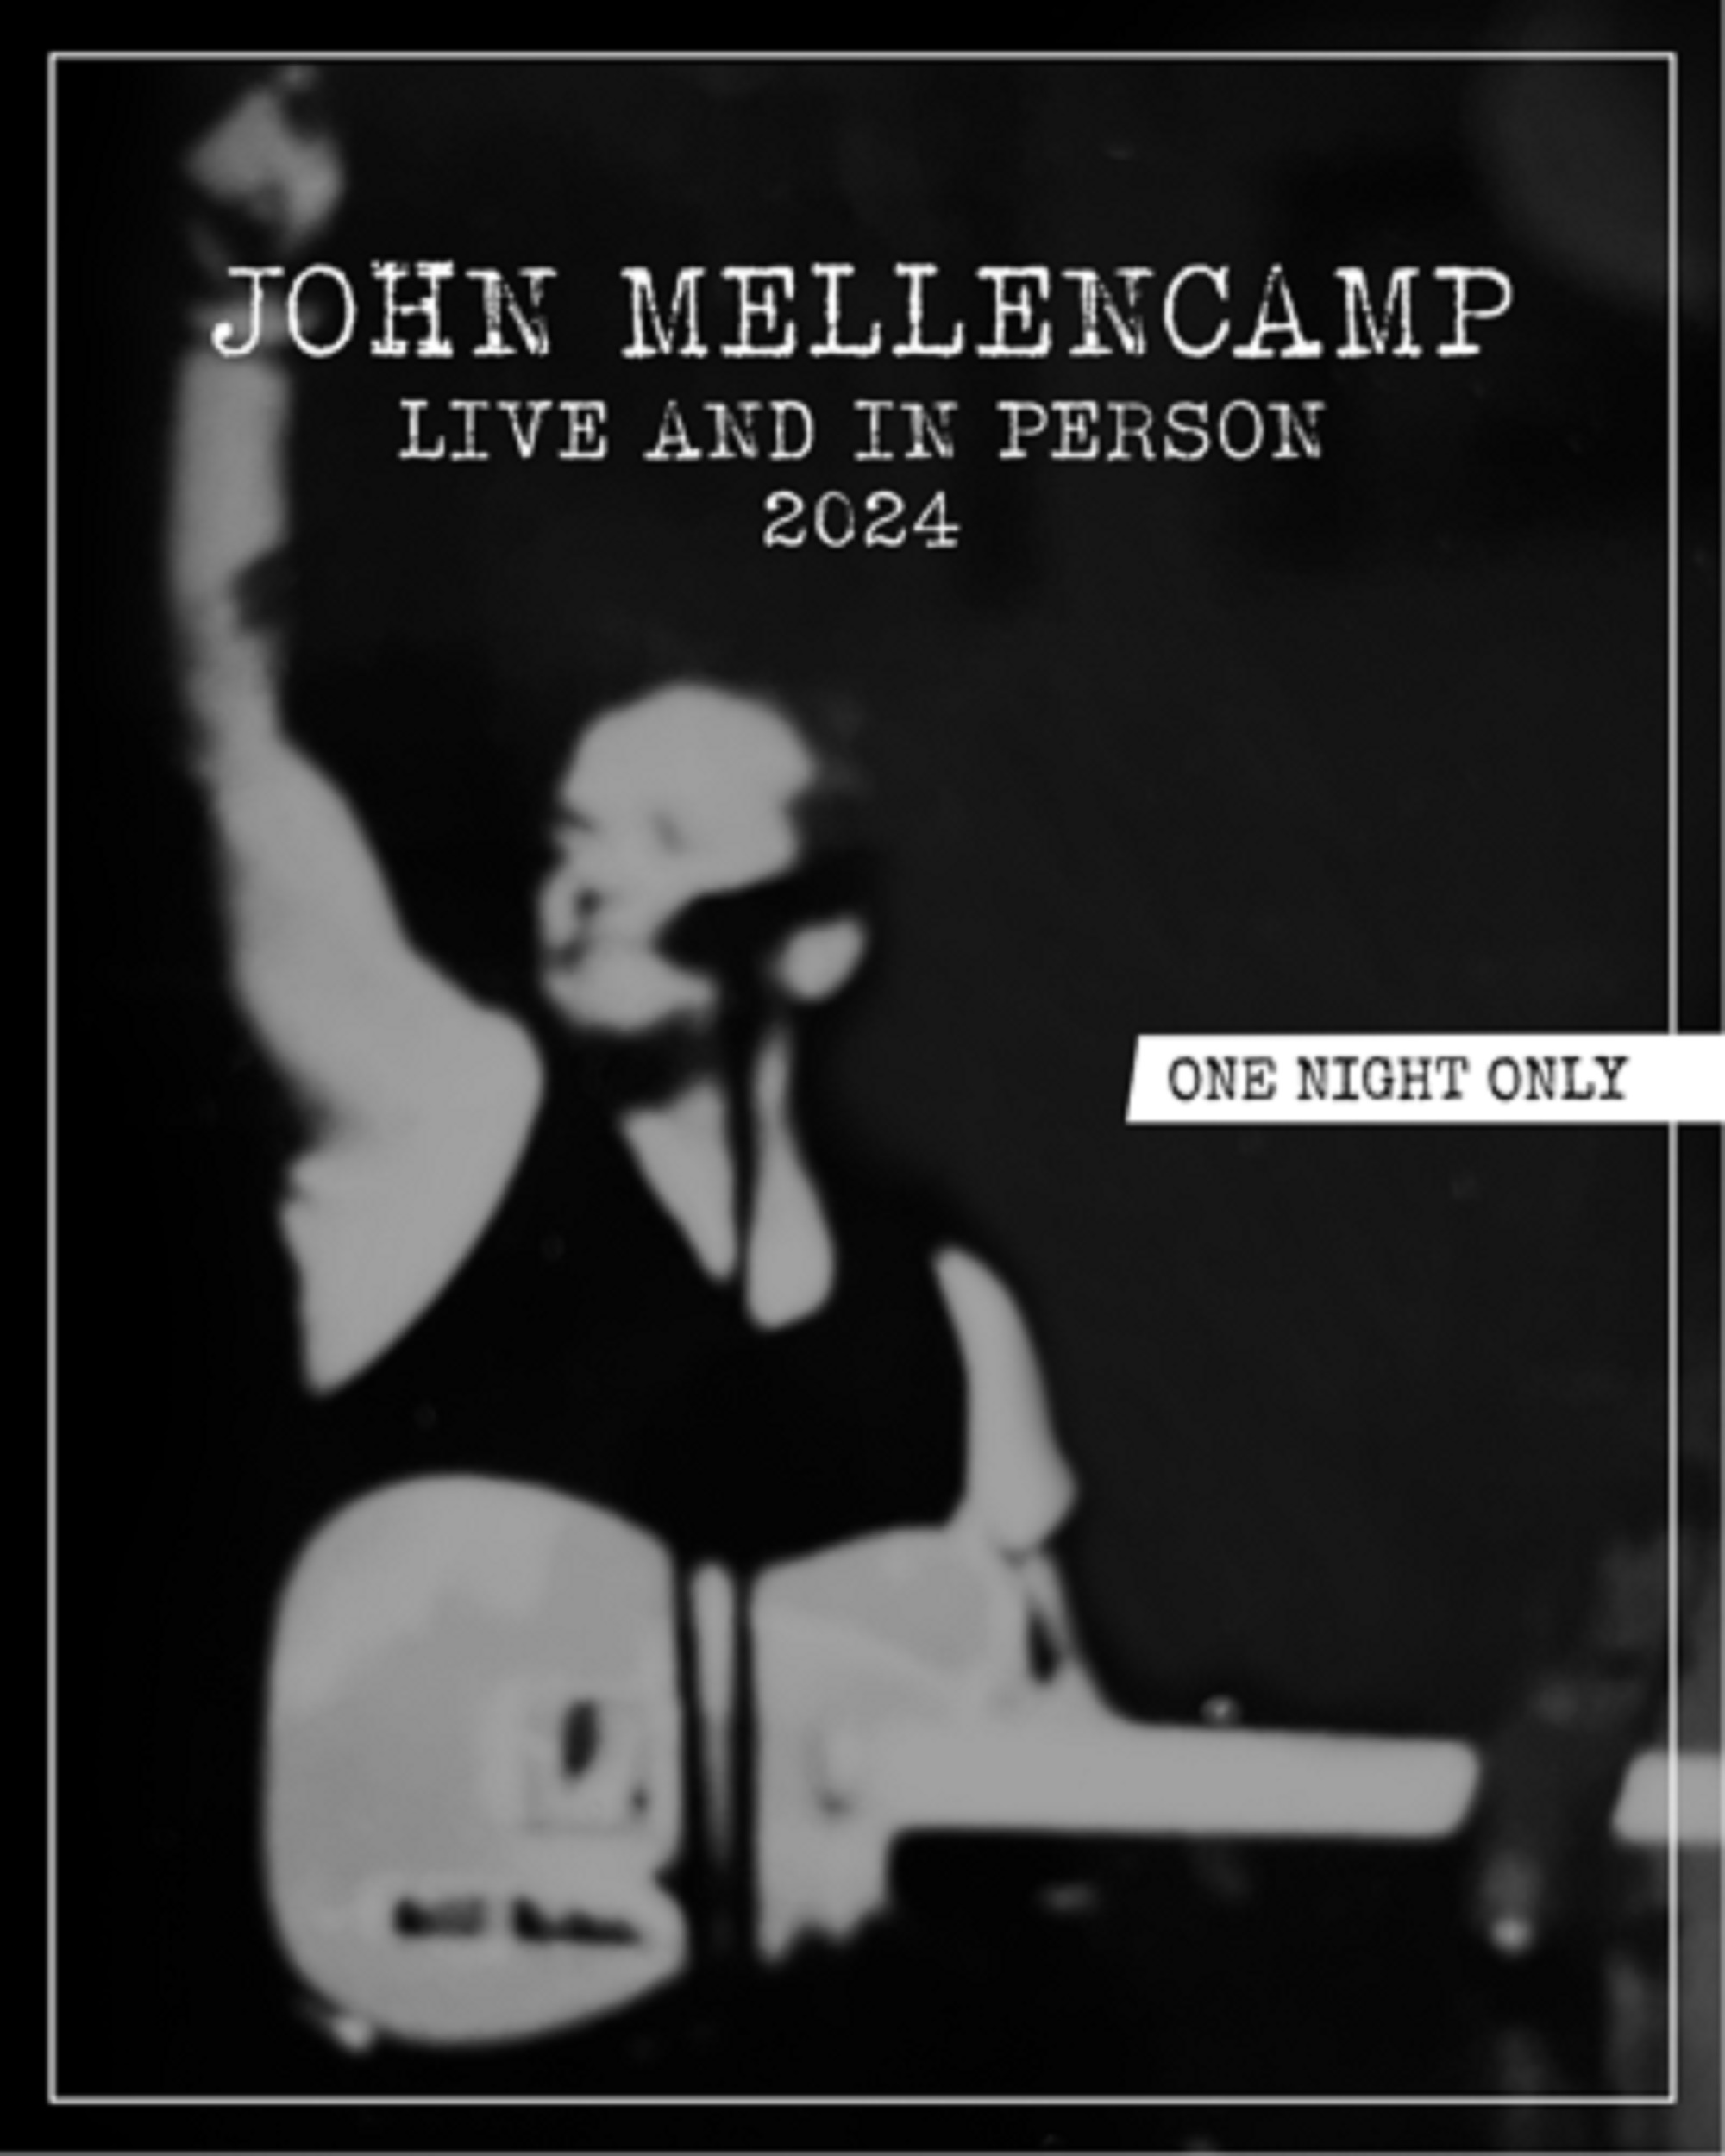 John Mellencamp confirms continuation of acclaimed tour with "Live and In Person 2024," beginning 3/8